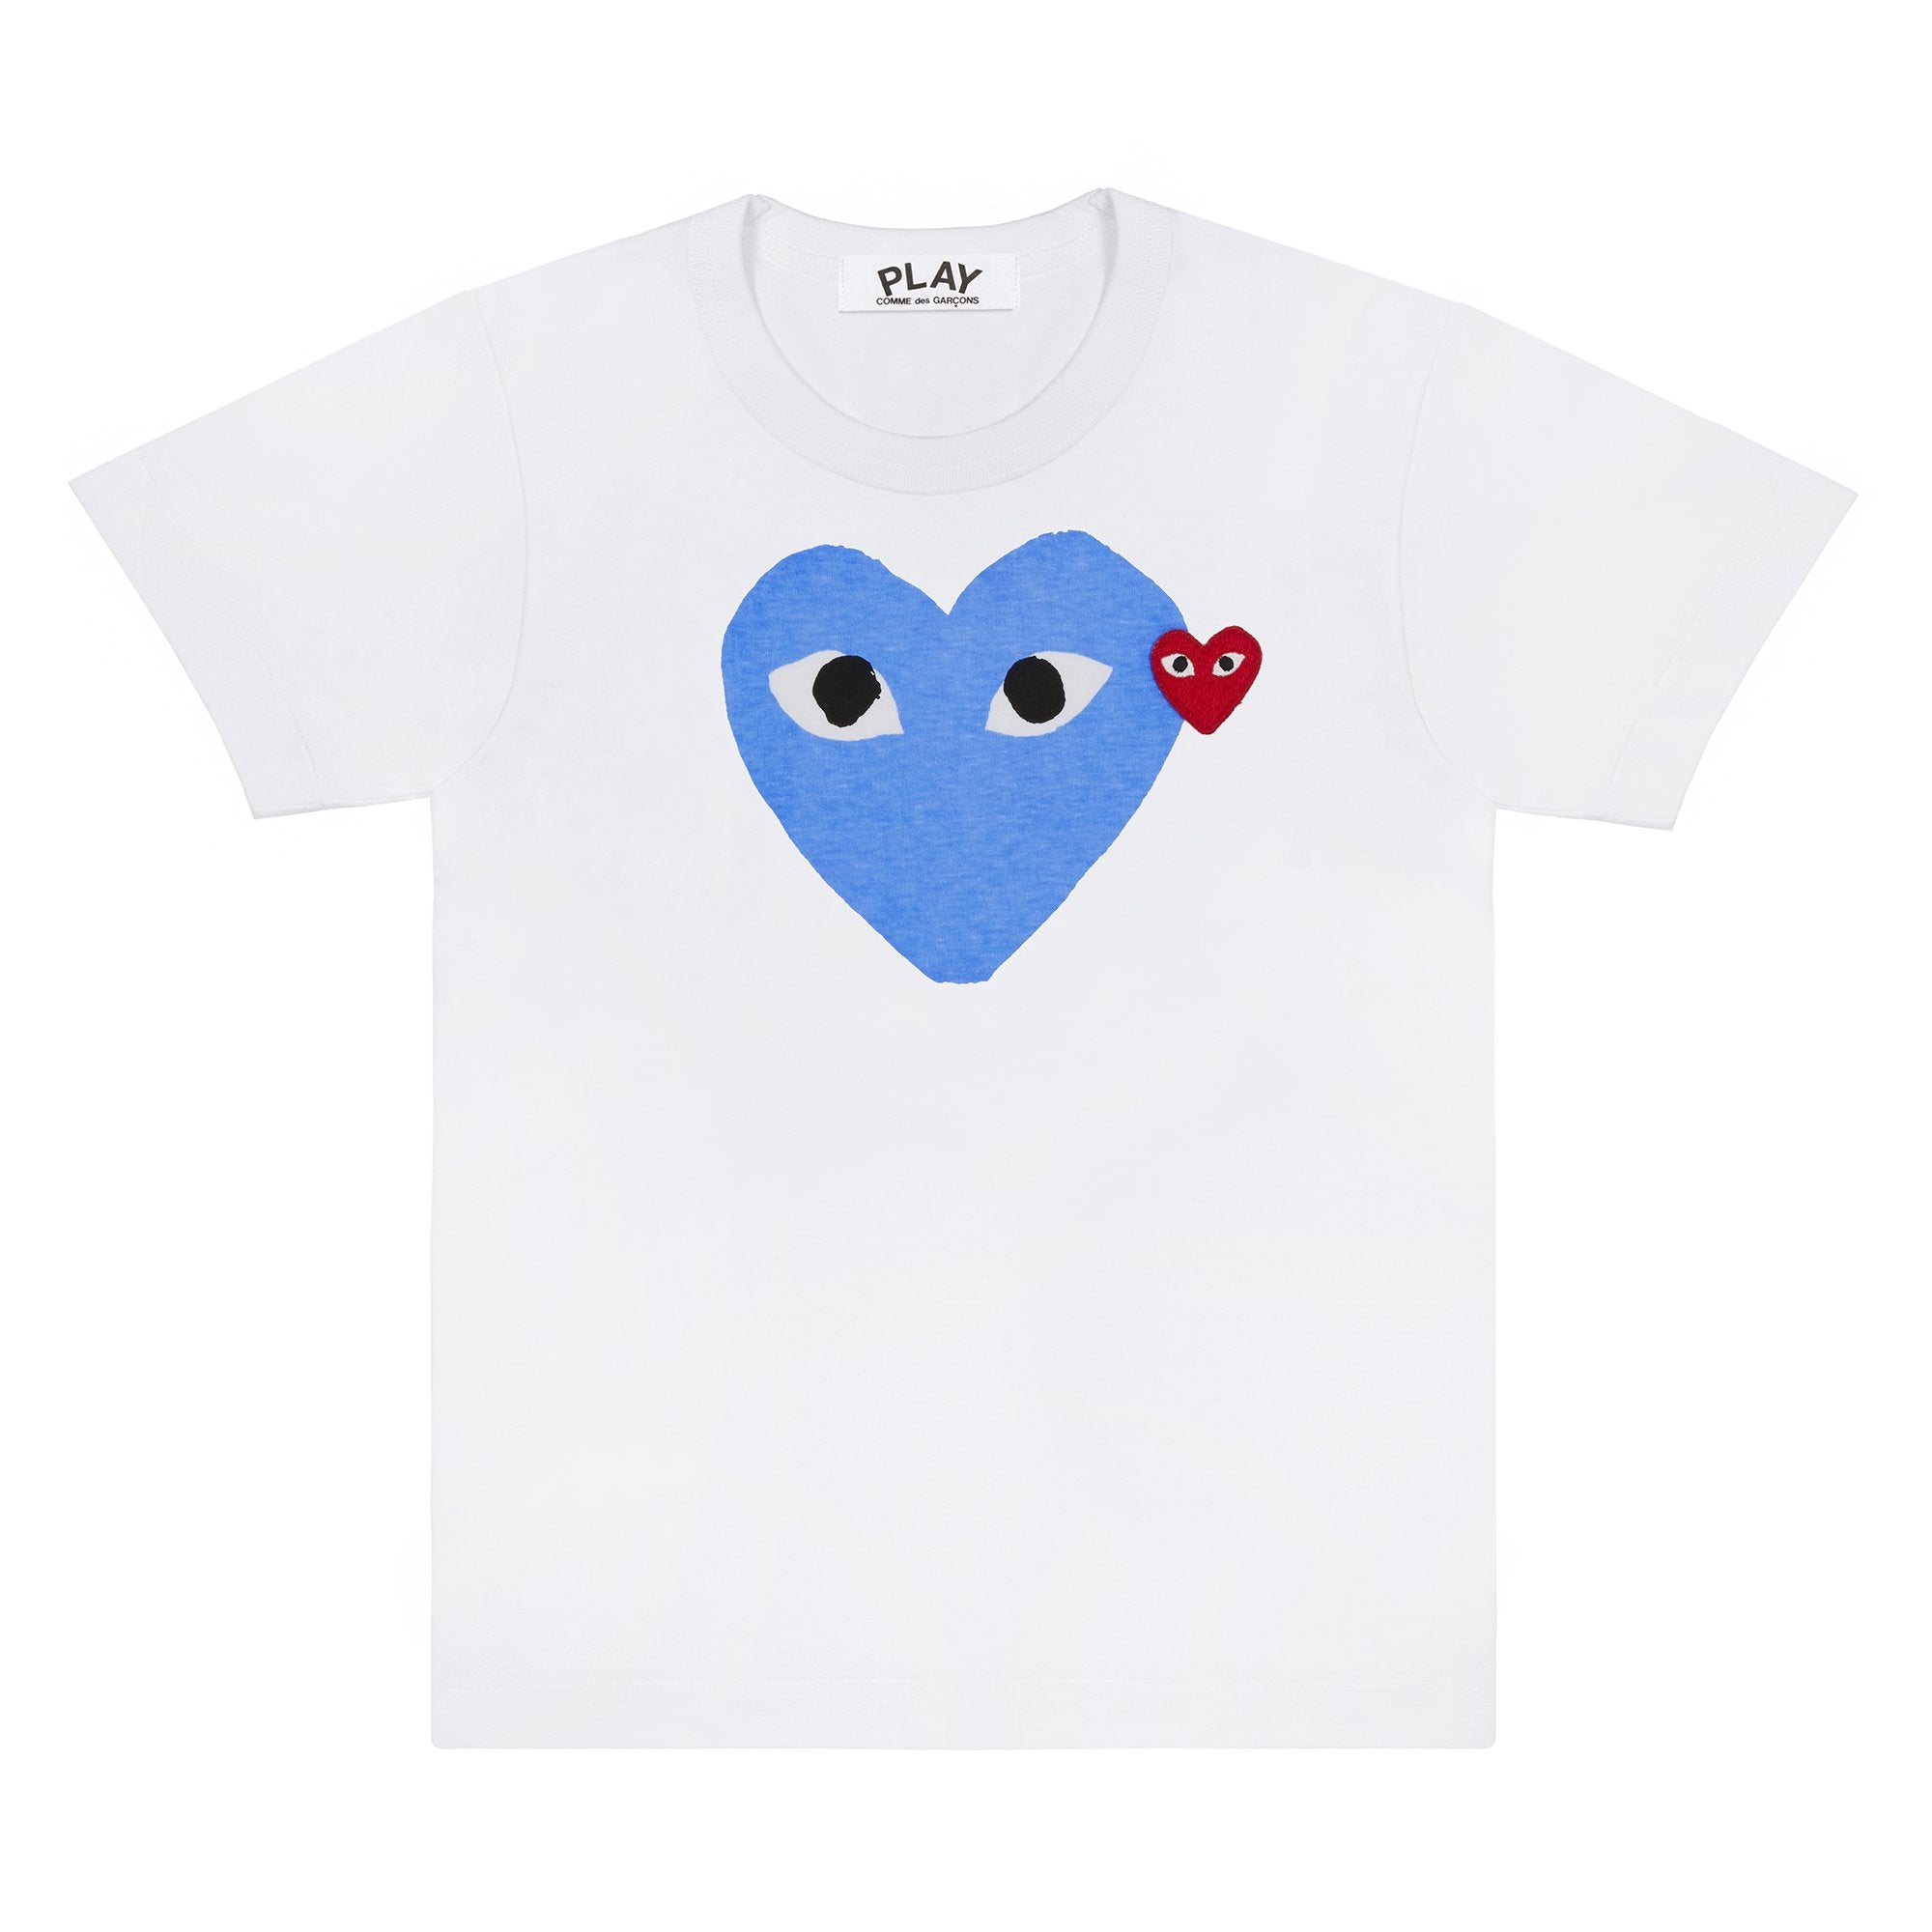 PLAY T-Shirt Pastel Heart and Red Emblem (Blue)